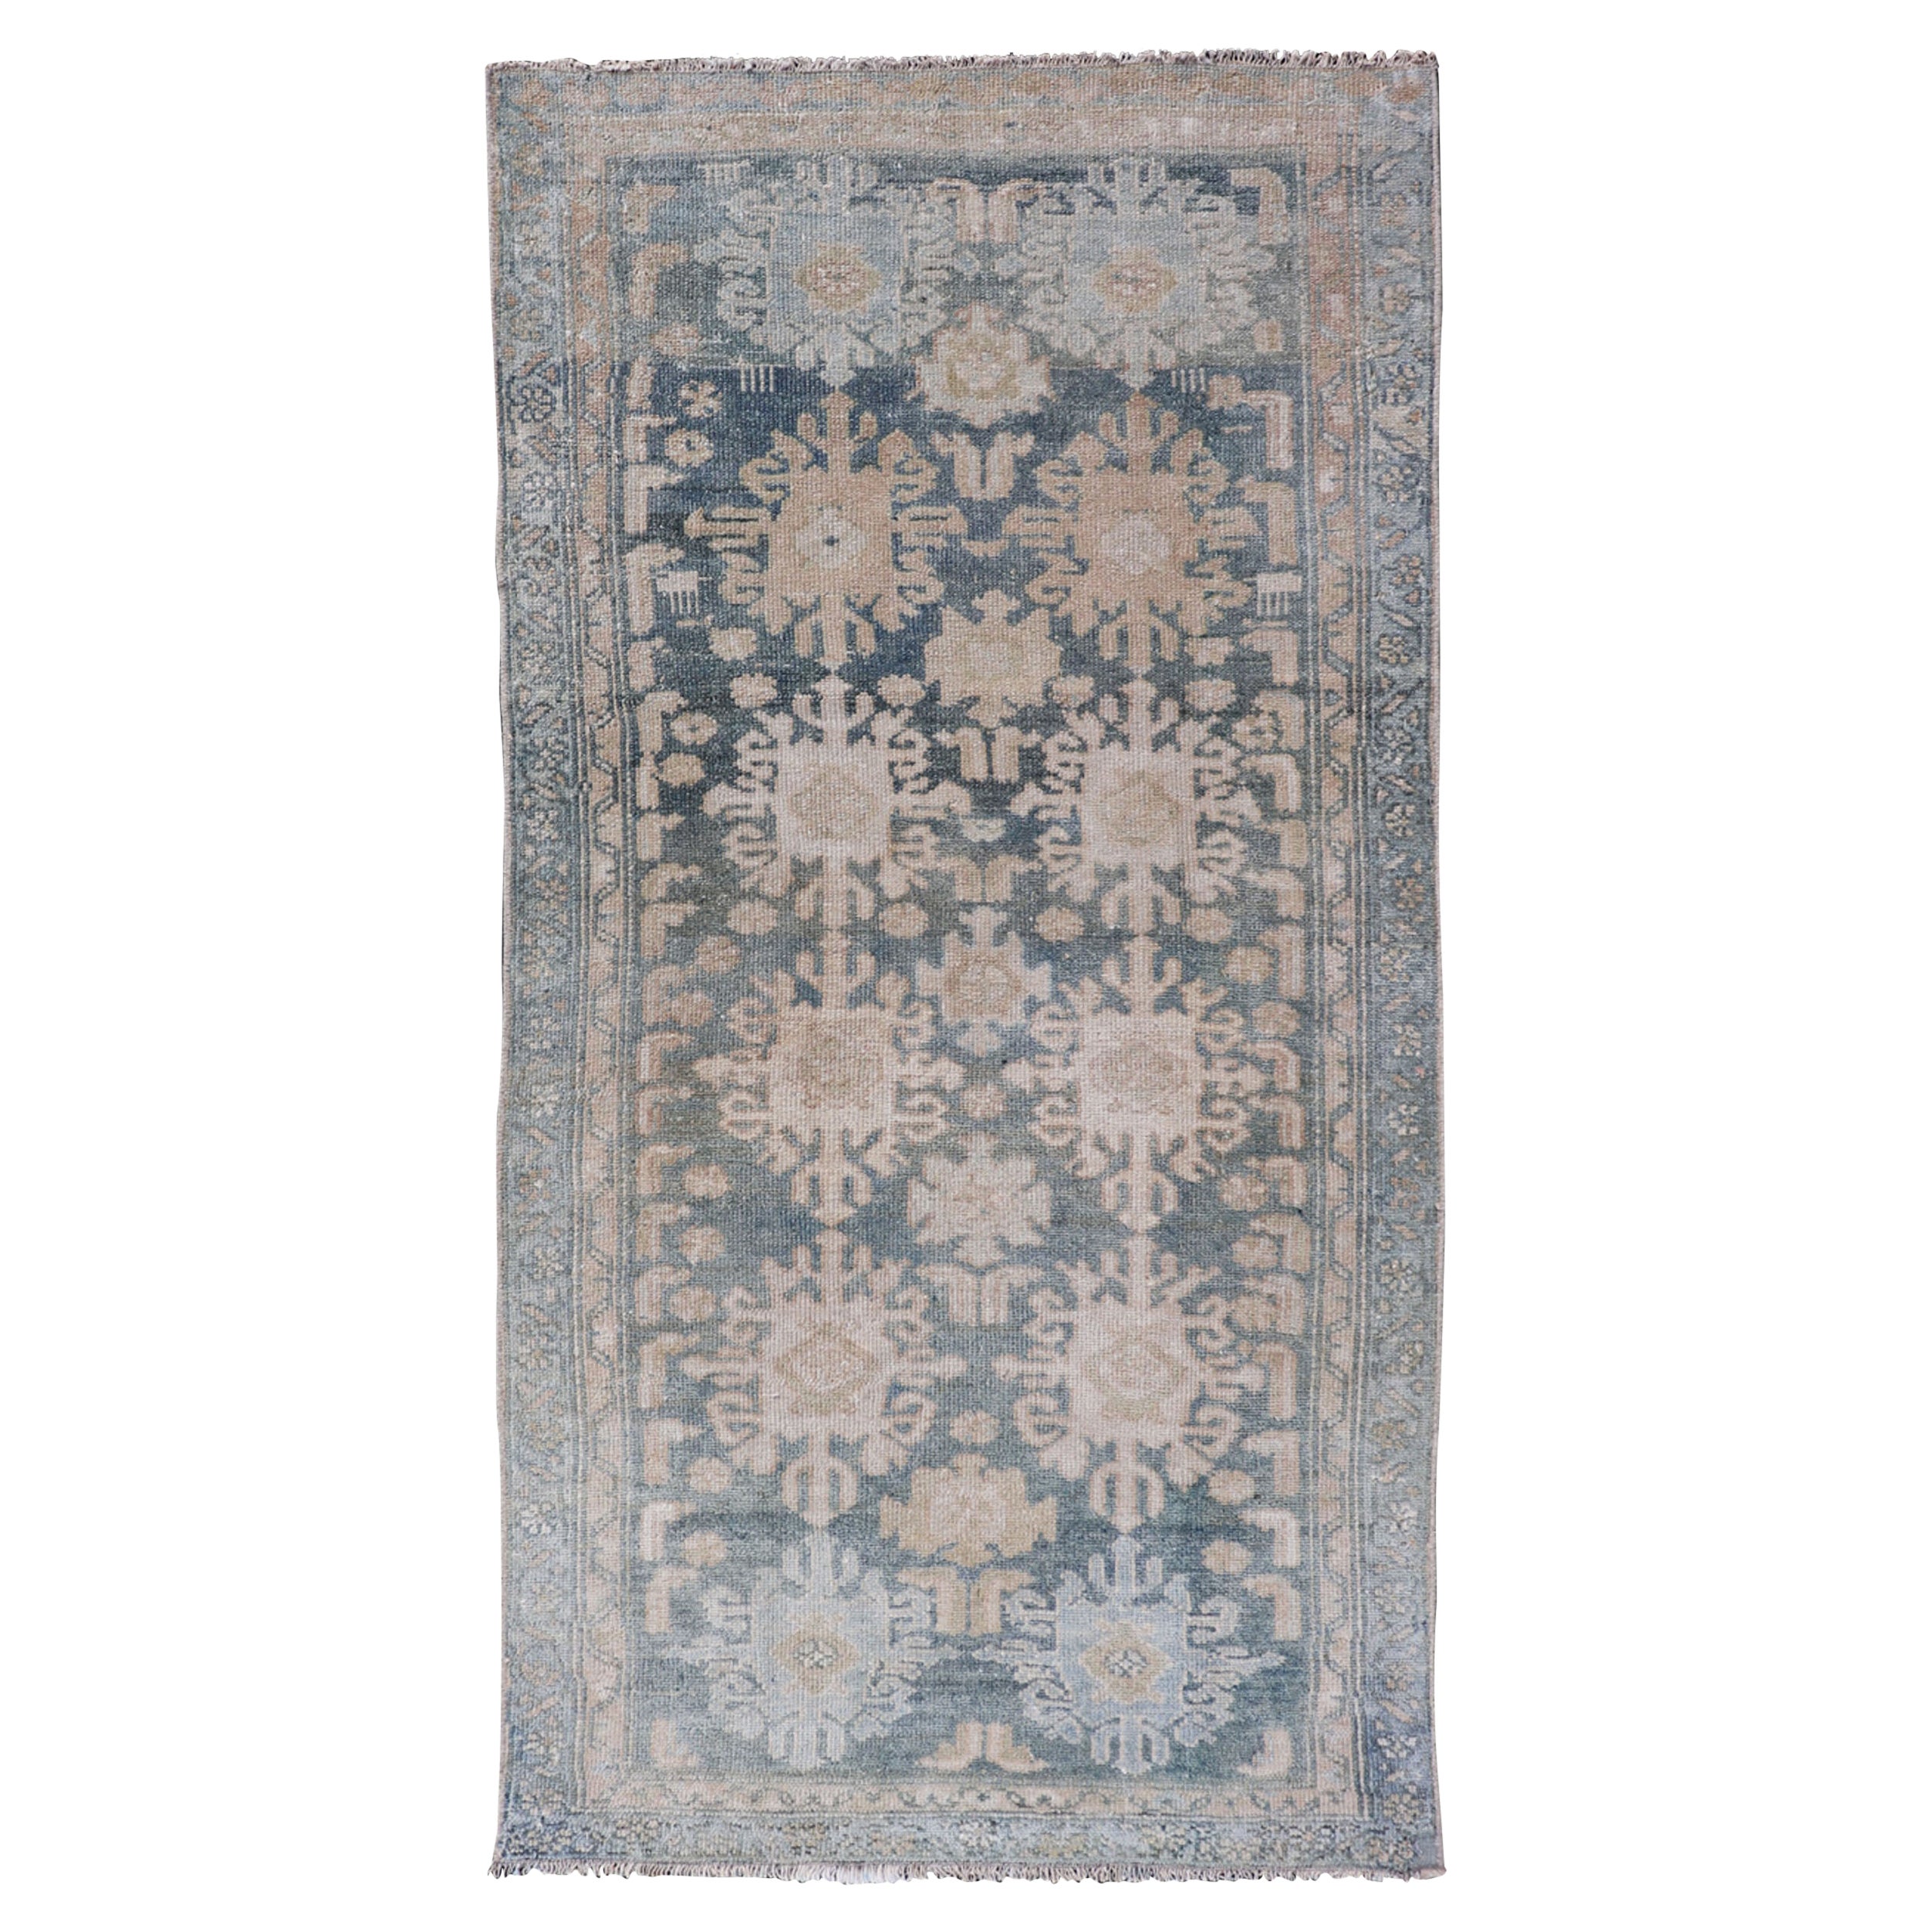 Antique Persian Malayer Rug with Sub-Geometric Design in Soft Blue and Cream